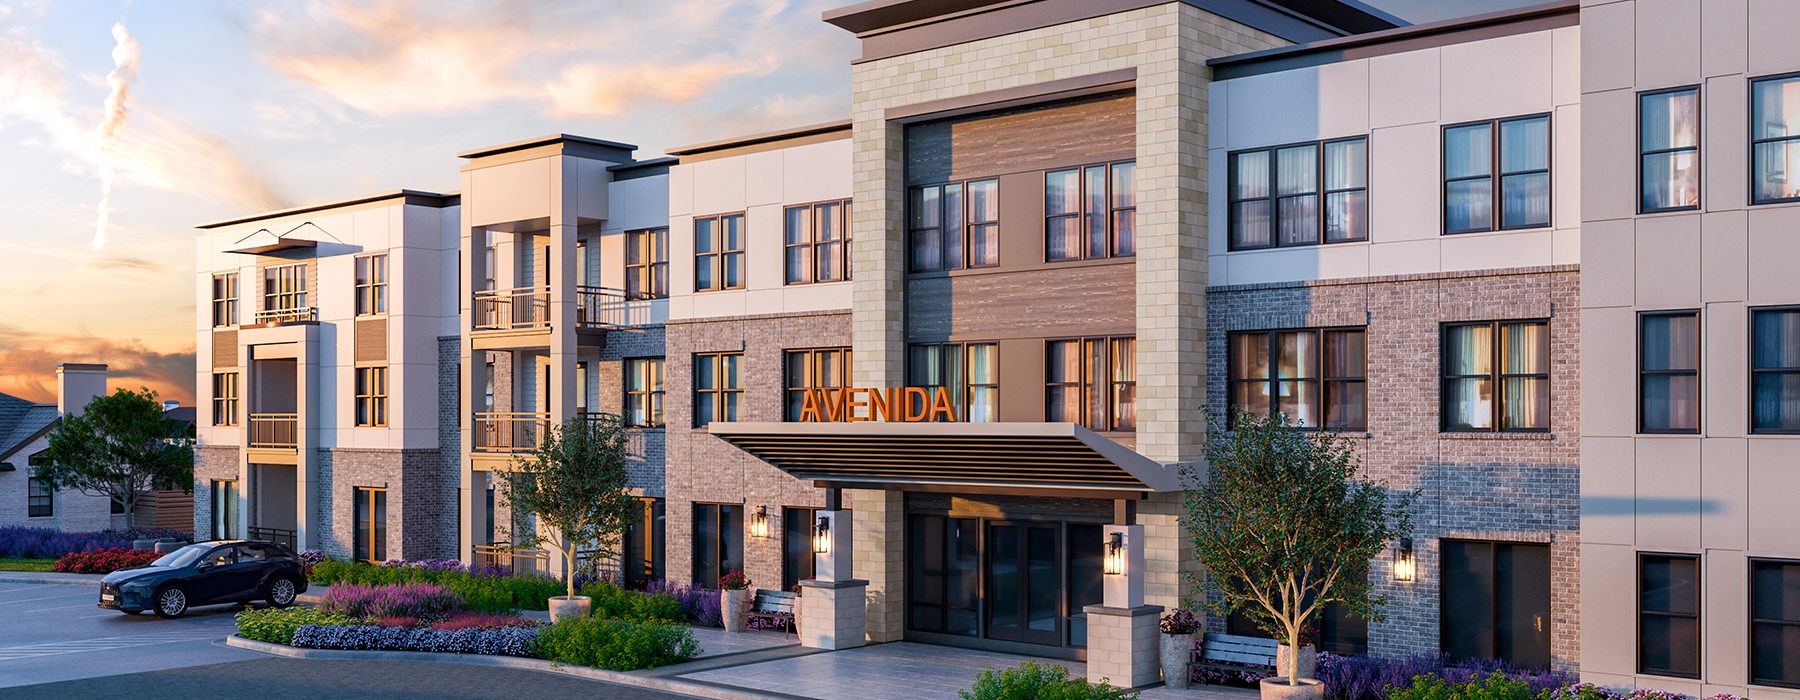 The entrance to our 55 and over housing in Carrollton, TX, featuring a sign reading "AVENIDA" and a view of the exterior.